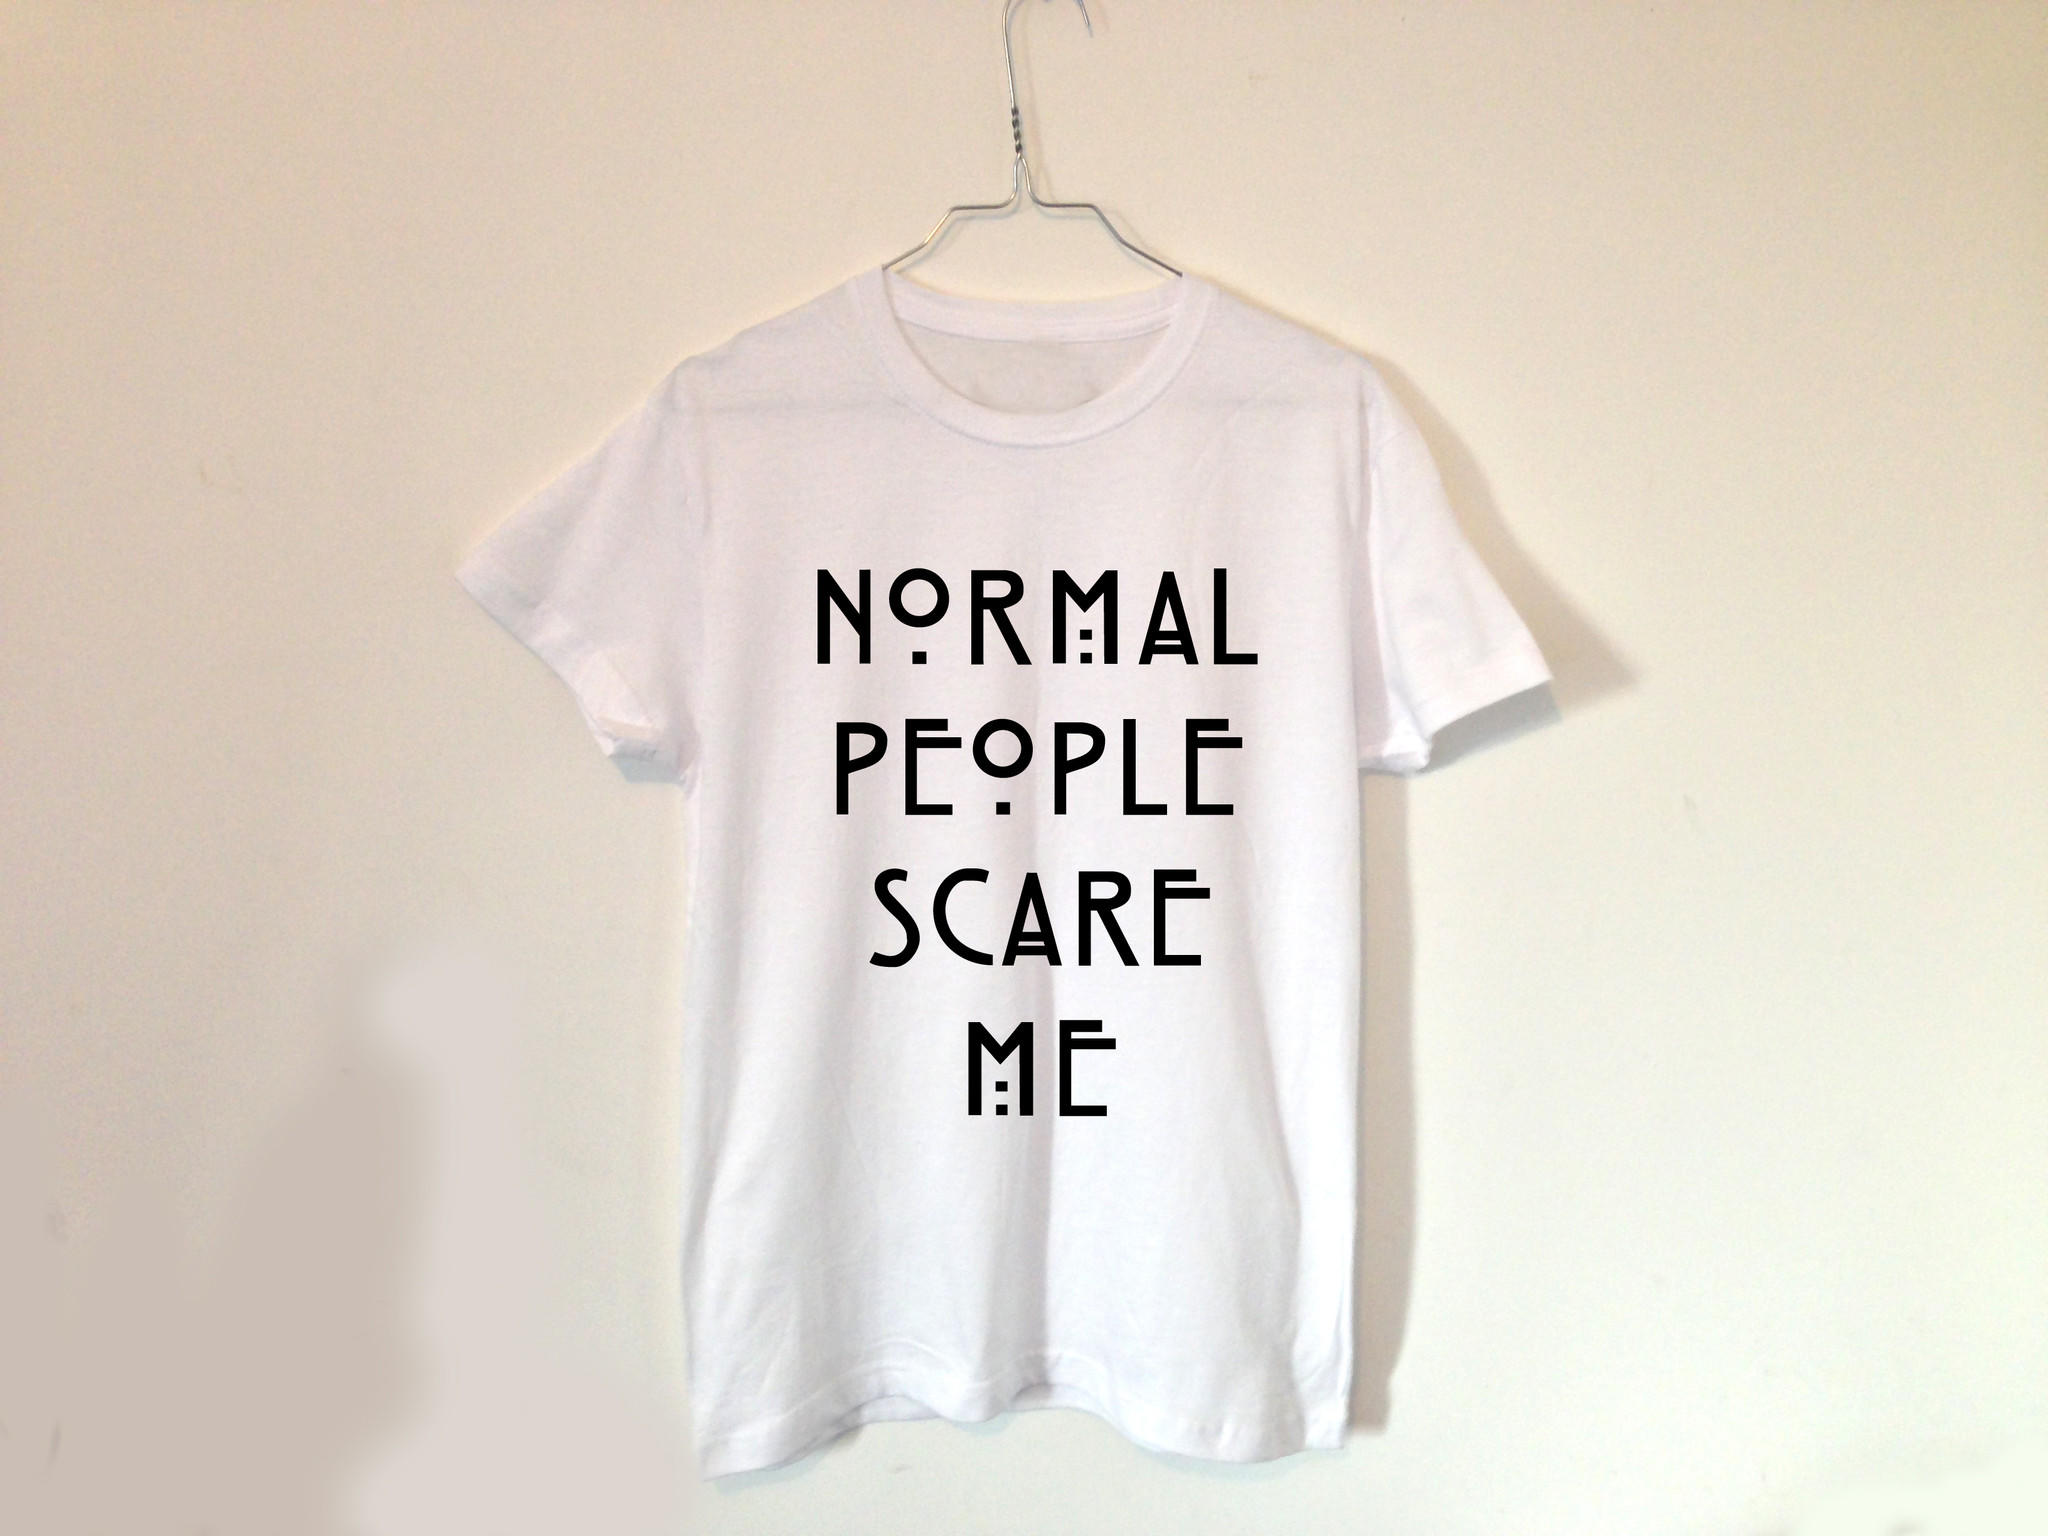 Normal People Scare Me - Blouse , HD Wallpaper & Backgrounds